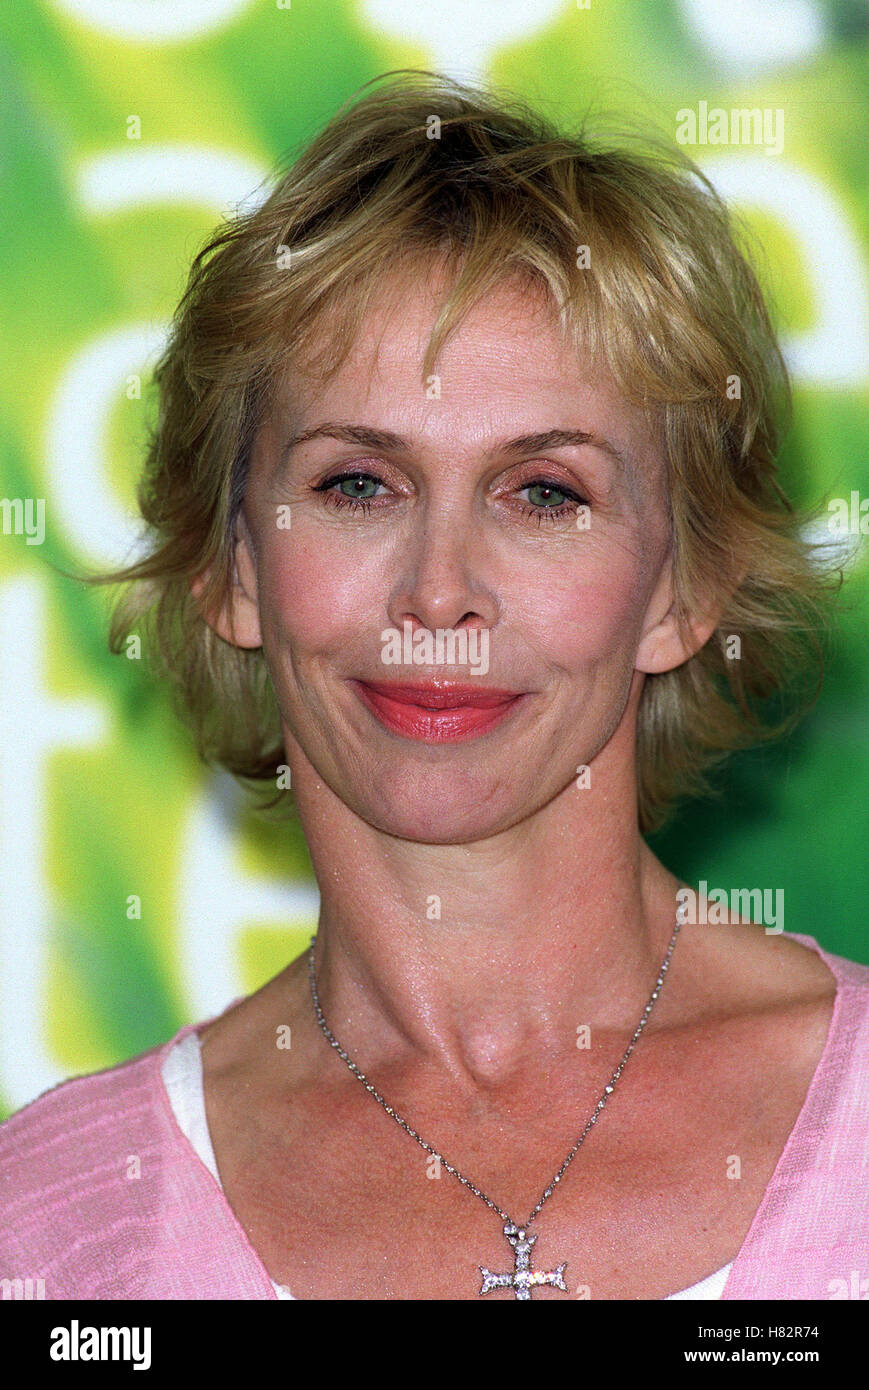 TRUDIE STYLER 'ME WITHOUT YOU' PHOTOCALL VENICE FILM FESTIVAL 2001 ITALY 03 September 2001 Stock Photo